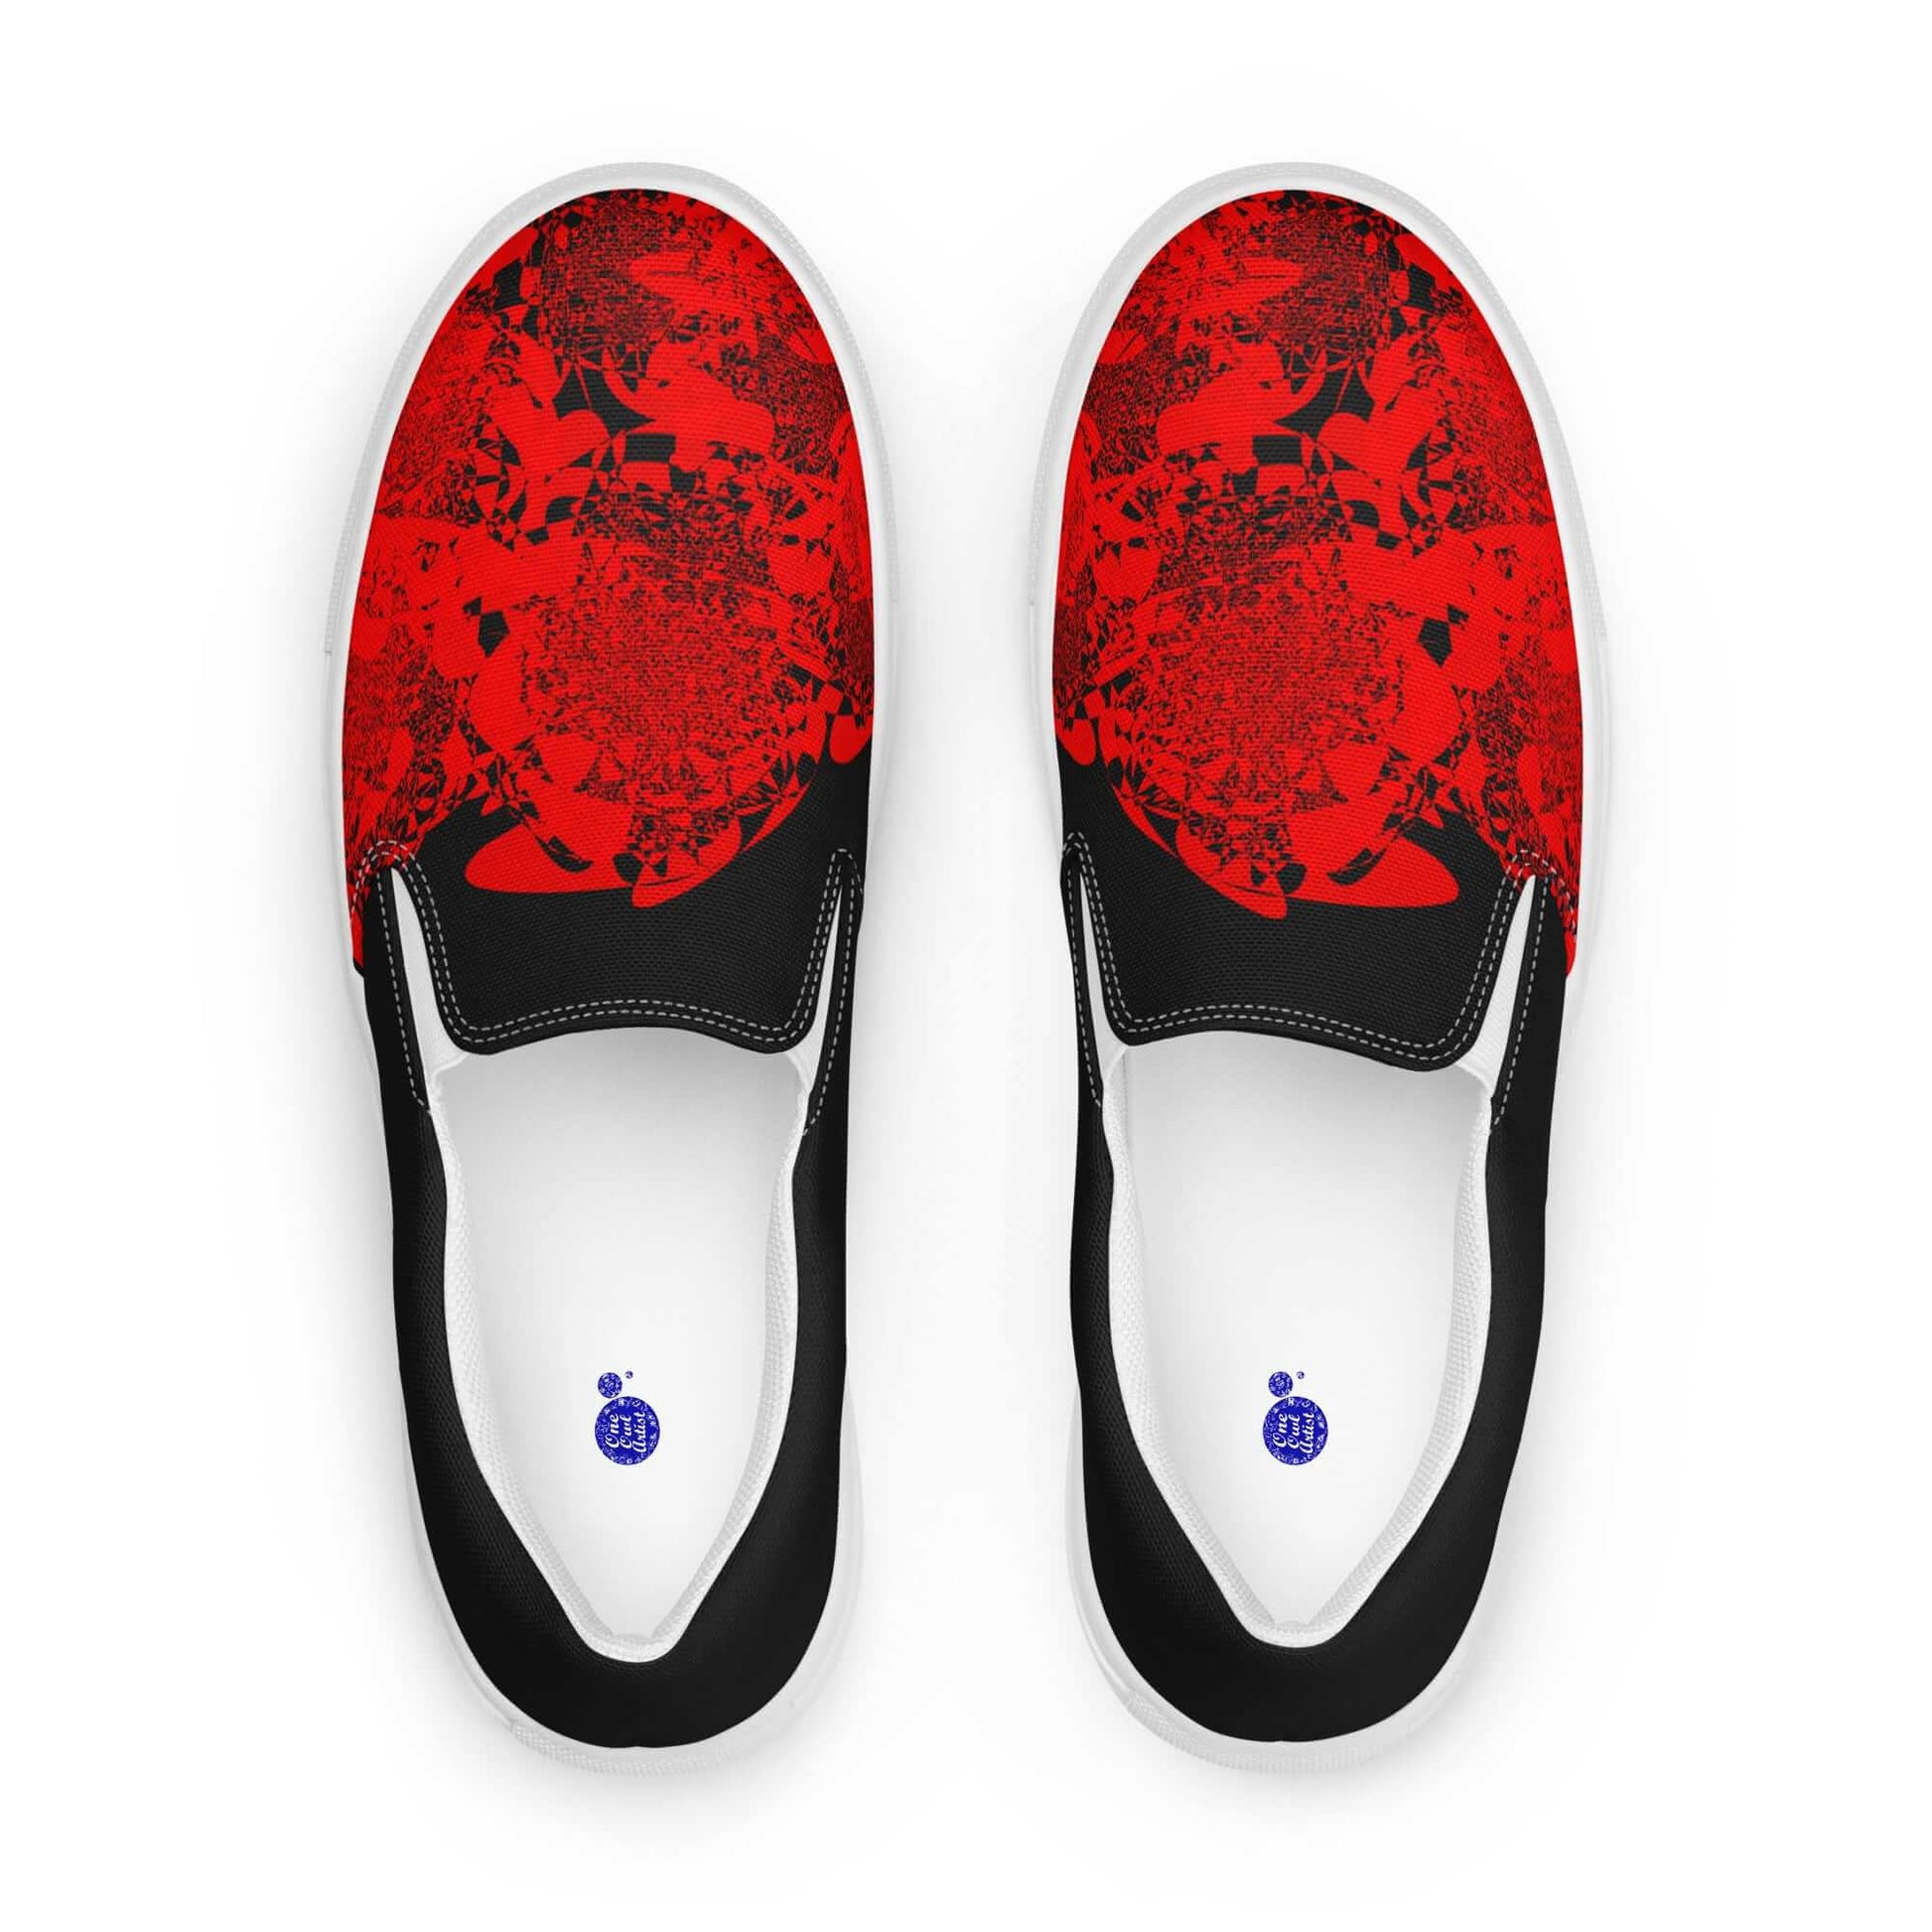 Slip-on Canvas Shoes for Women  with Black Red Abstract Design